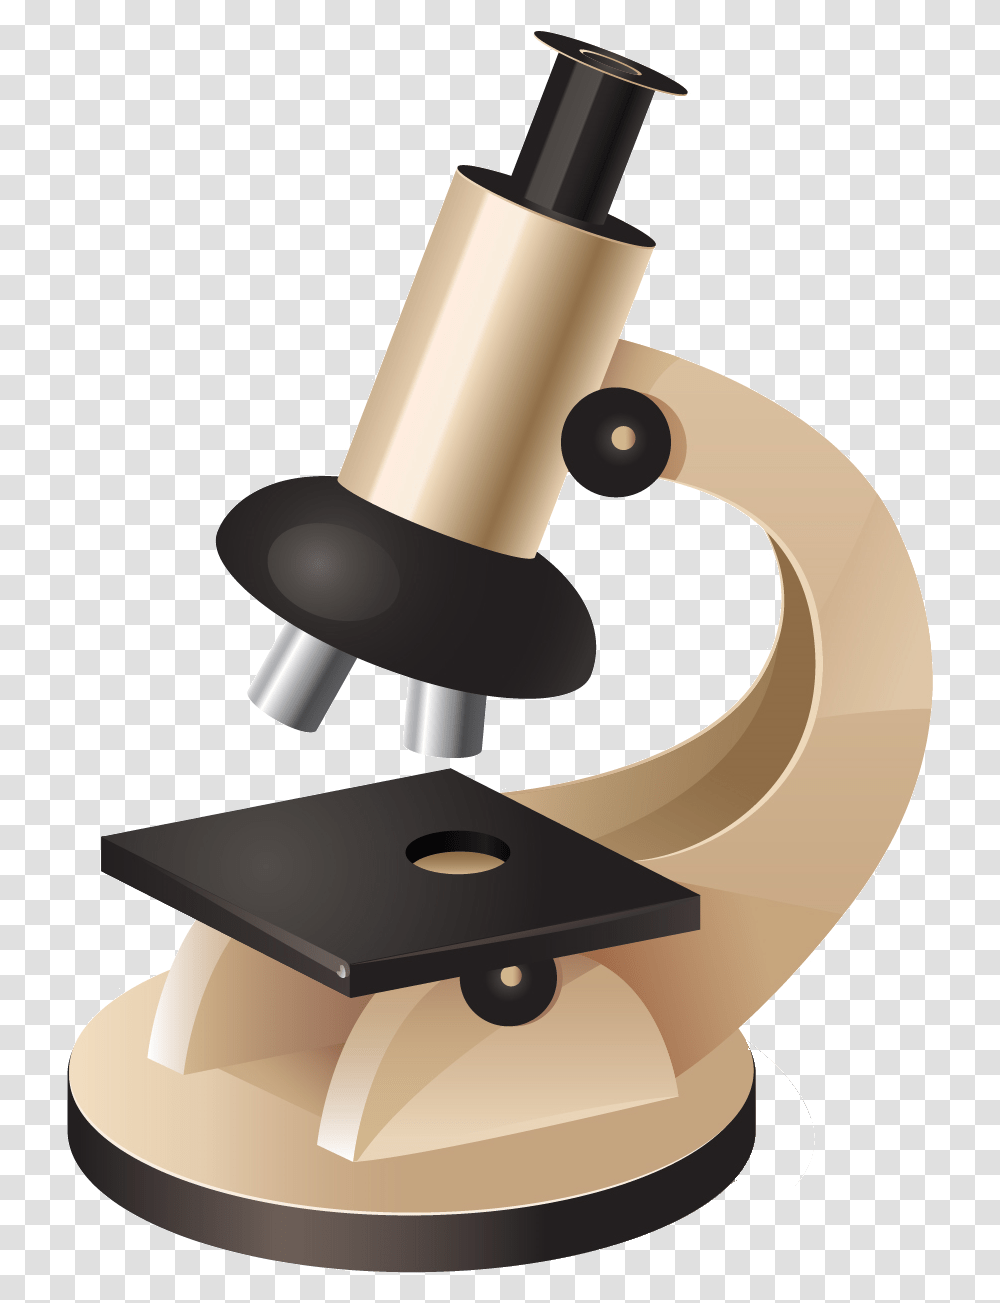 Microscope Clipart Background Microscope Clipart, Sink Faucet, Lamp Transparent Png